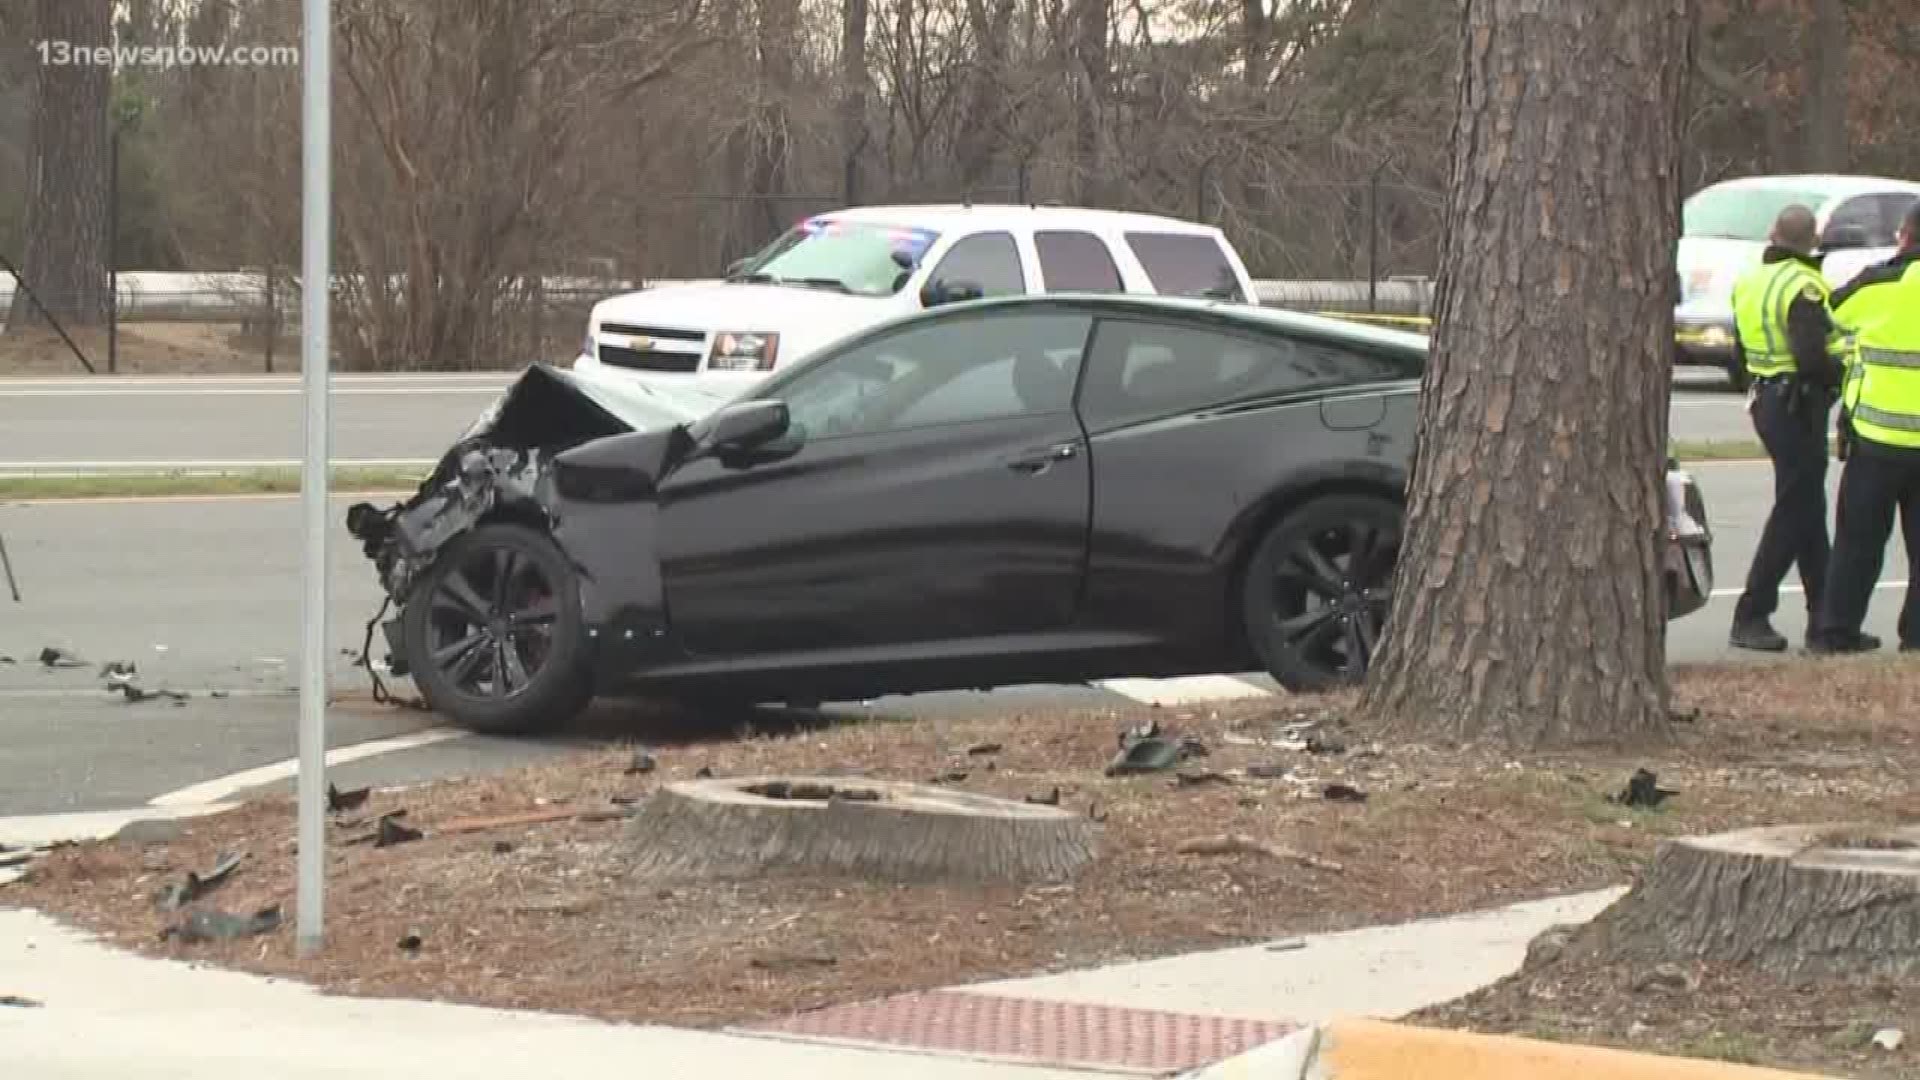 A person died following a crash on Shore Drive.